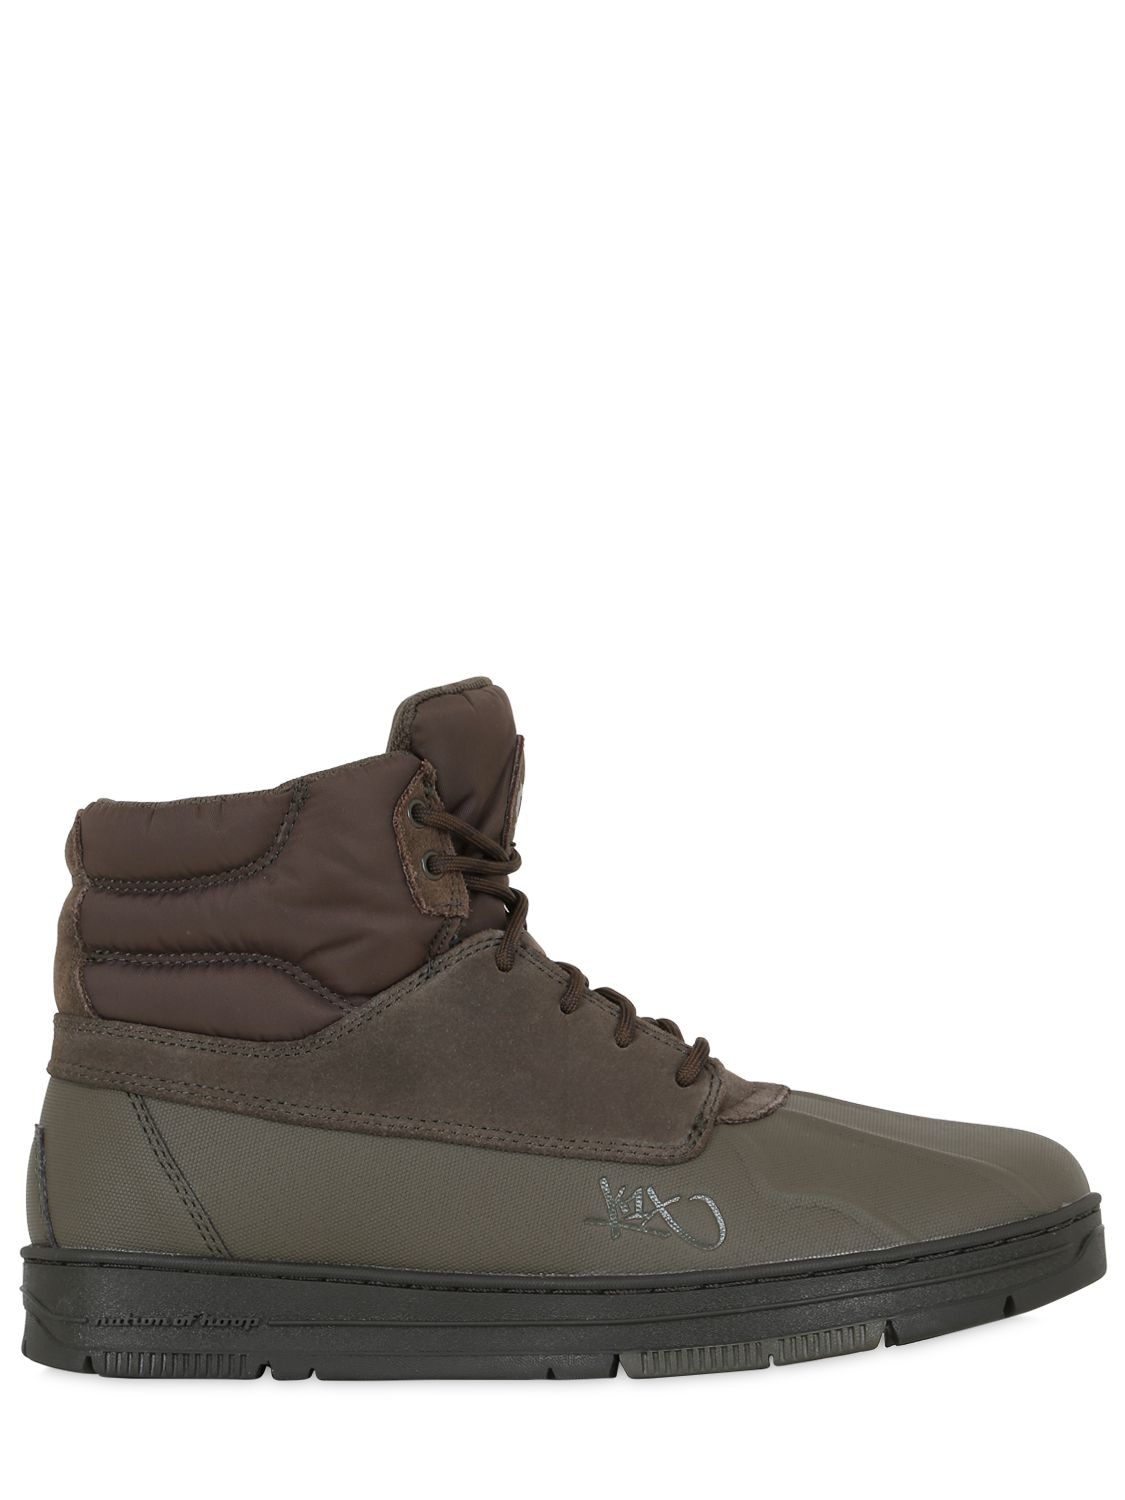 K1x Nylon Boots In Military Green